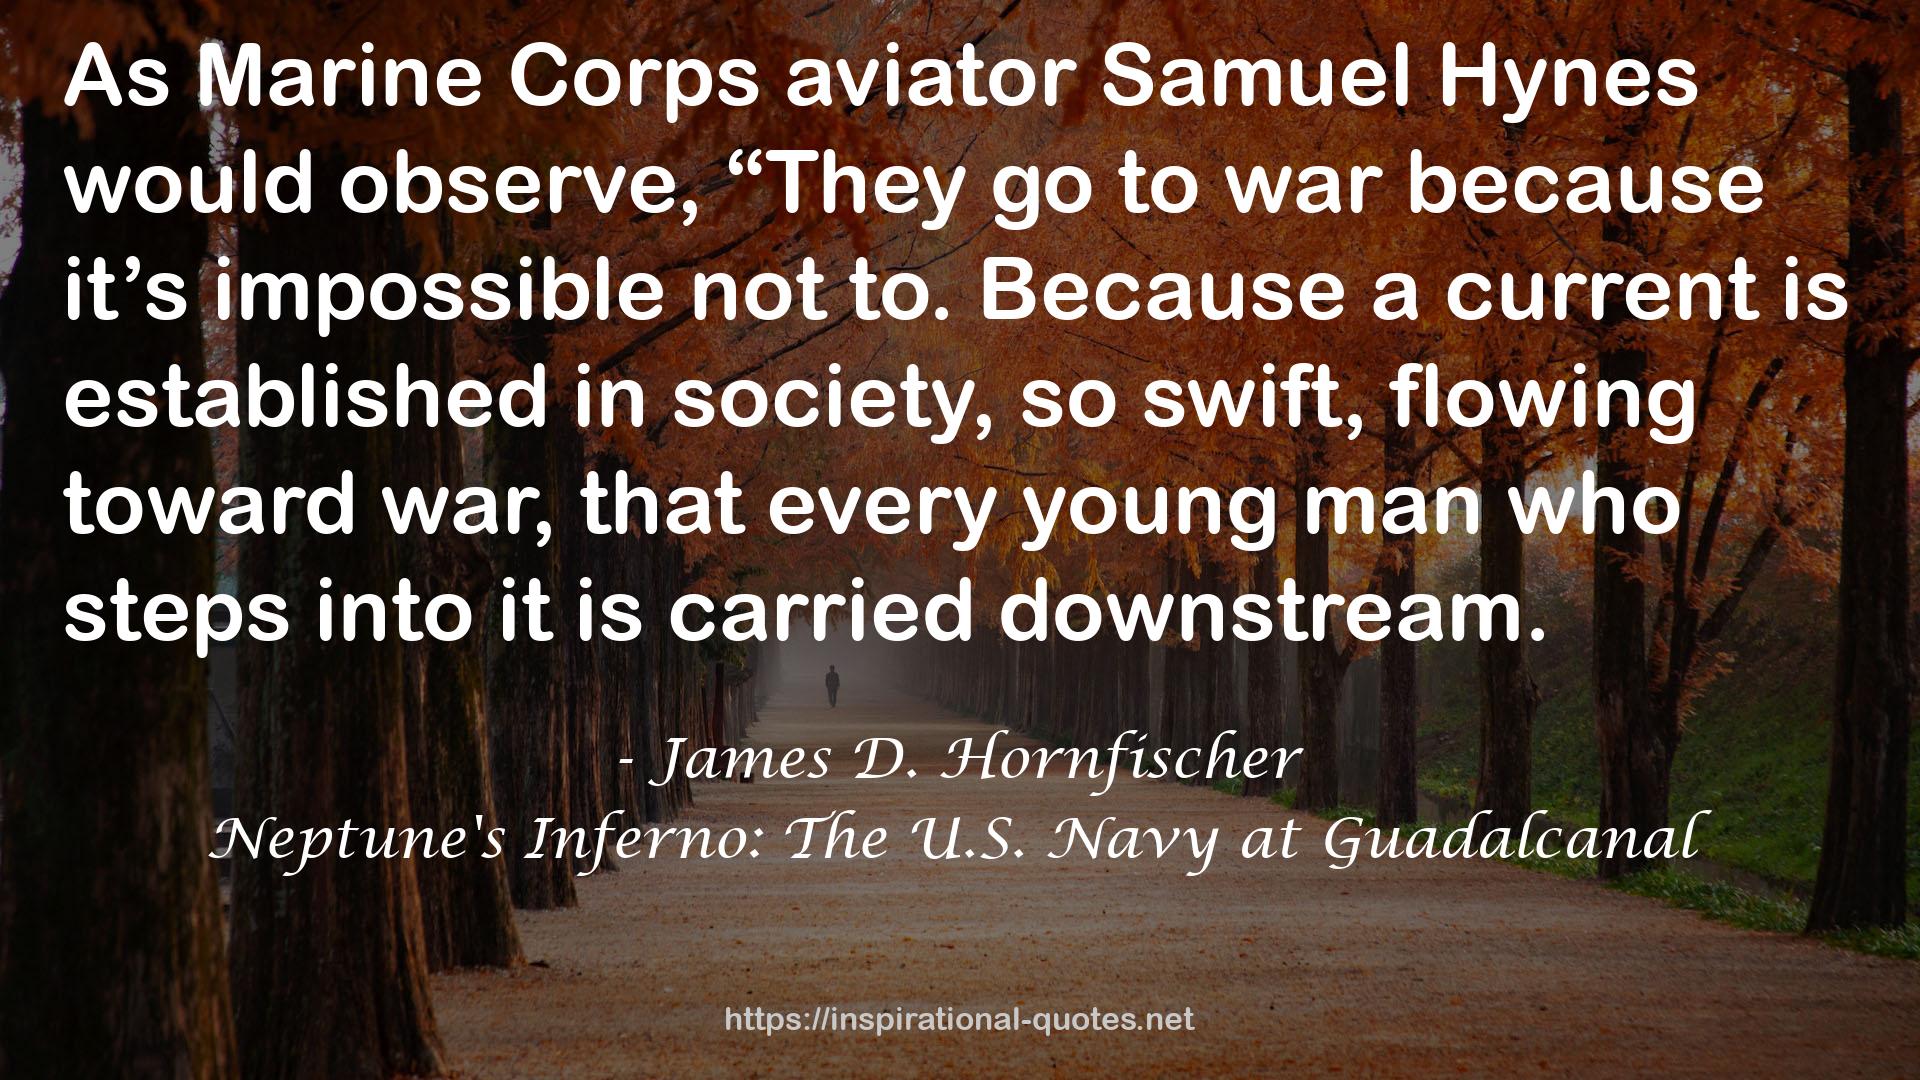 Neptune's Inferno: The U.S. Navy at Guadalcanal QUOTES